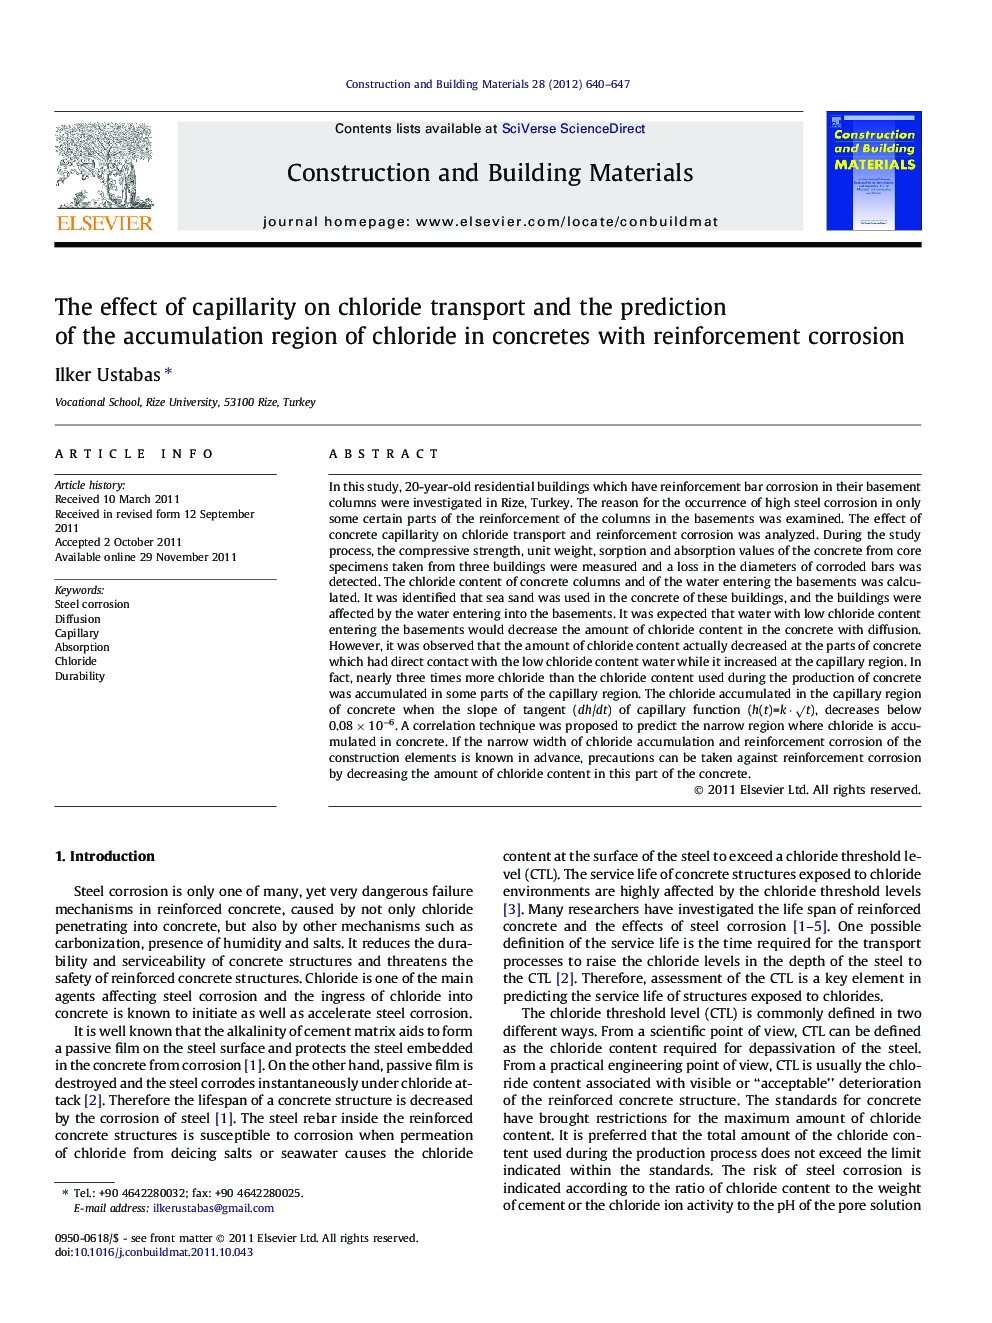 The effect of capillarity on chloride transport and the prediction of the accumulation region of chloride in concretes with reinforcement corrosion